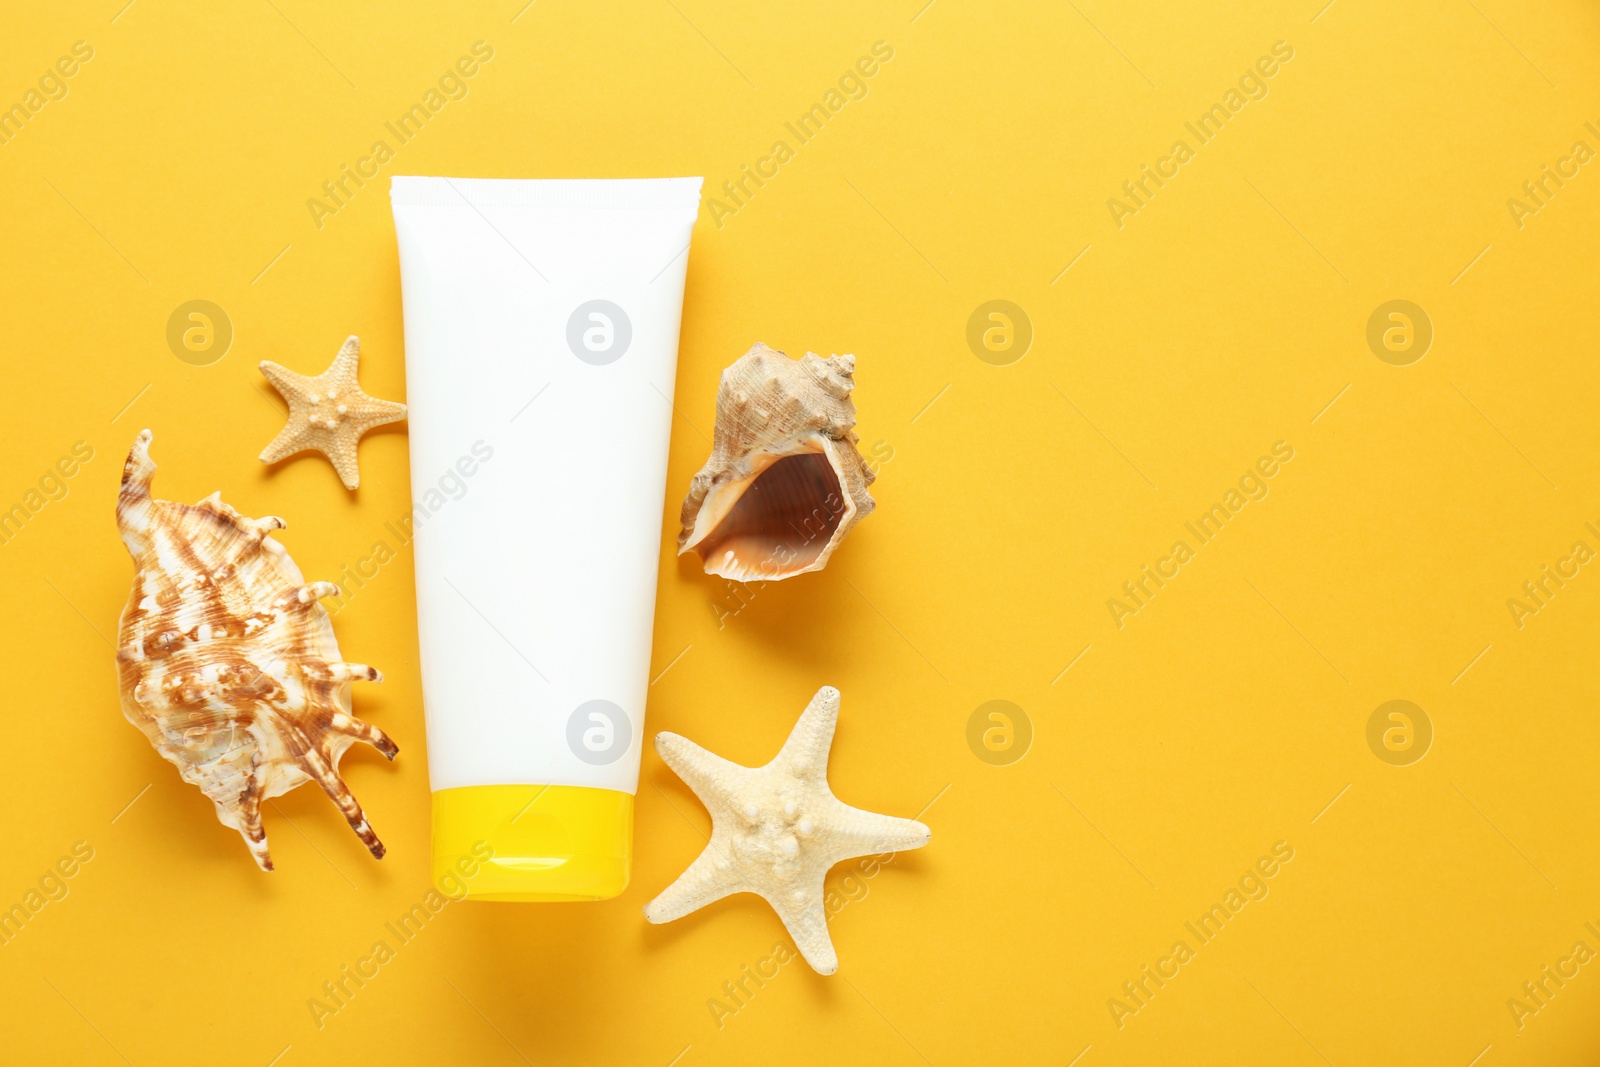 Photo of Suntan product, starfishes and seashells on orange background, flat lay. Space for text